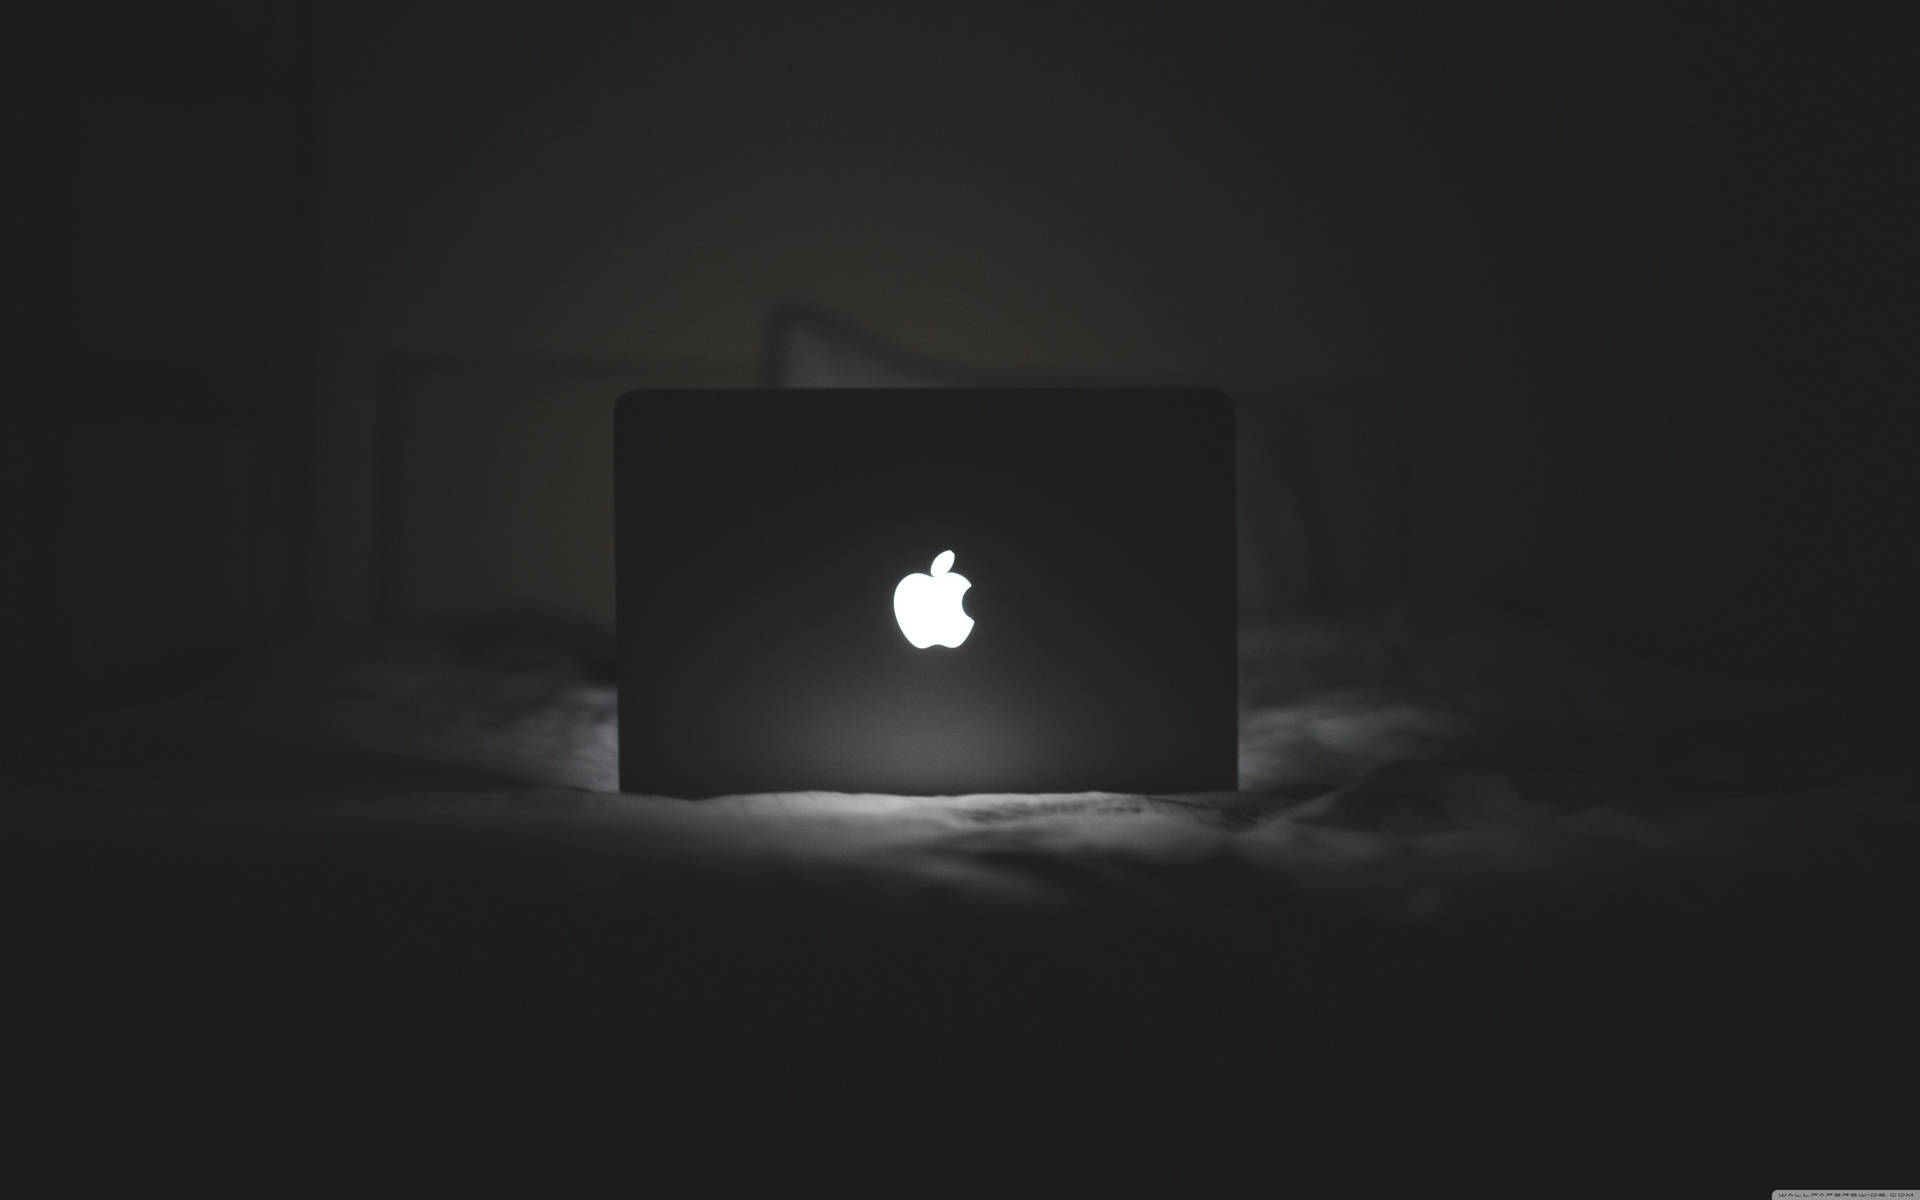 Black Macbook Laptop - Ready for productivity and creativity Wallpaper